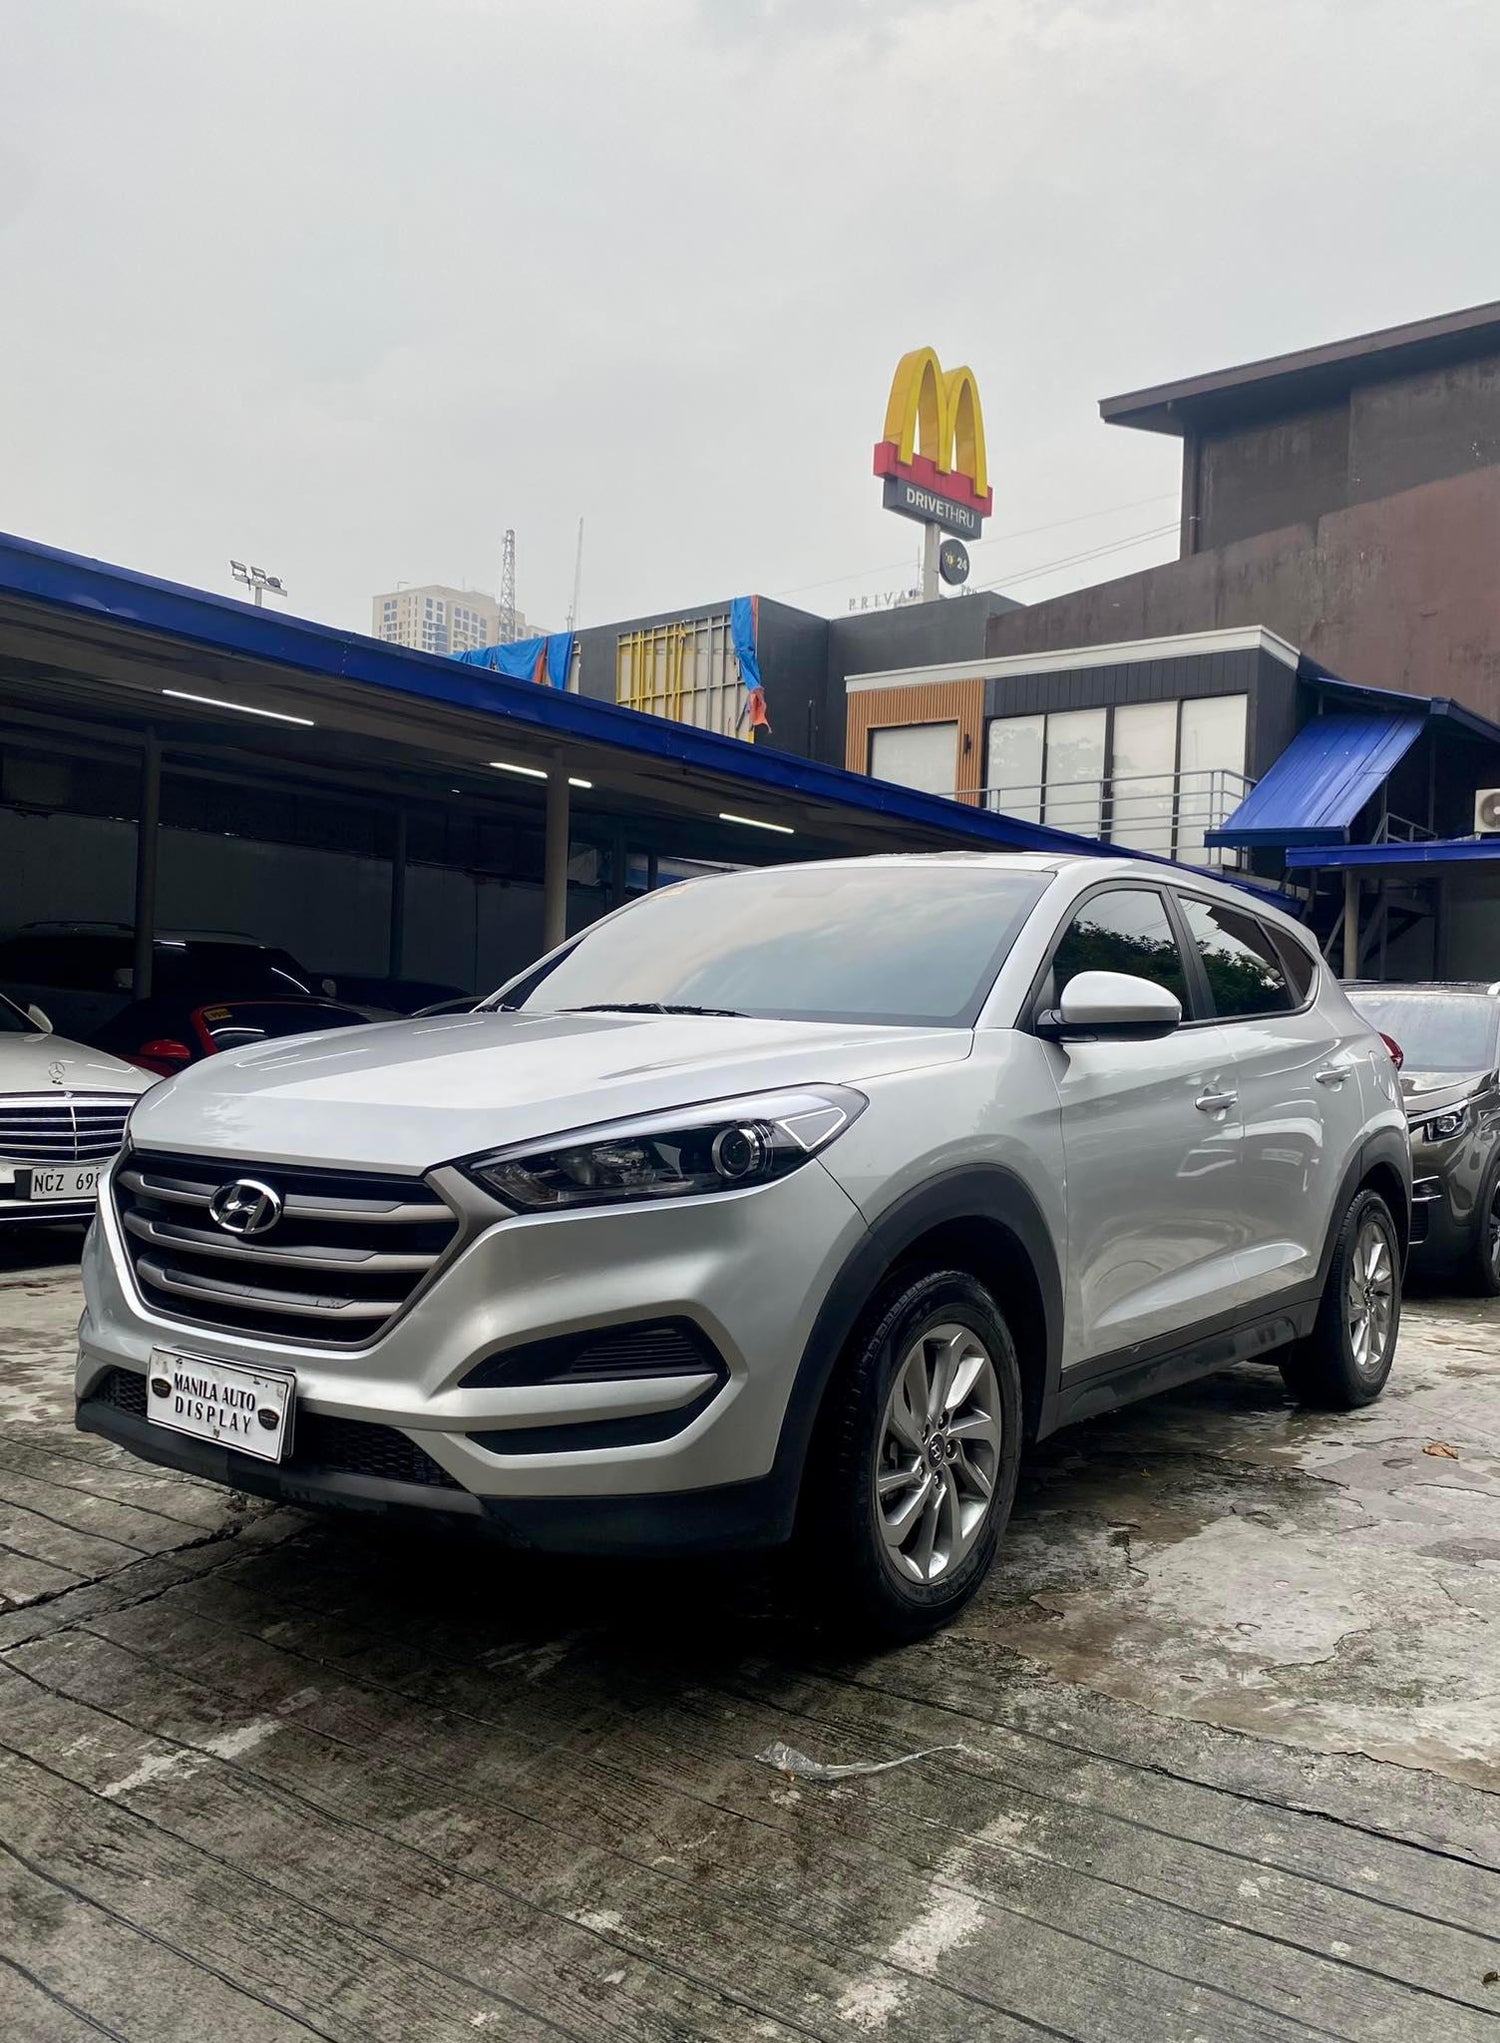 2016 HYUNDAI TUCSON 2.0L GL AUTOMATIC TRANSMISSION | Secondhand Used Cars for Sale at Manila Auto Display.